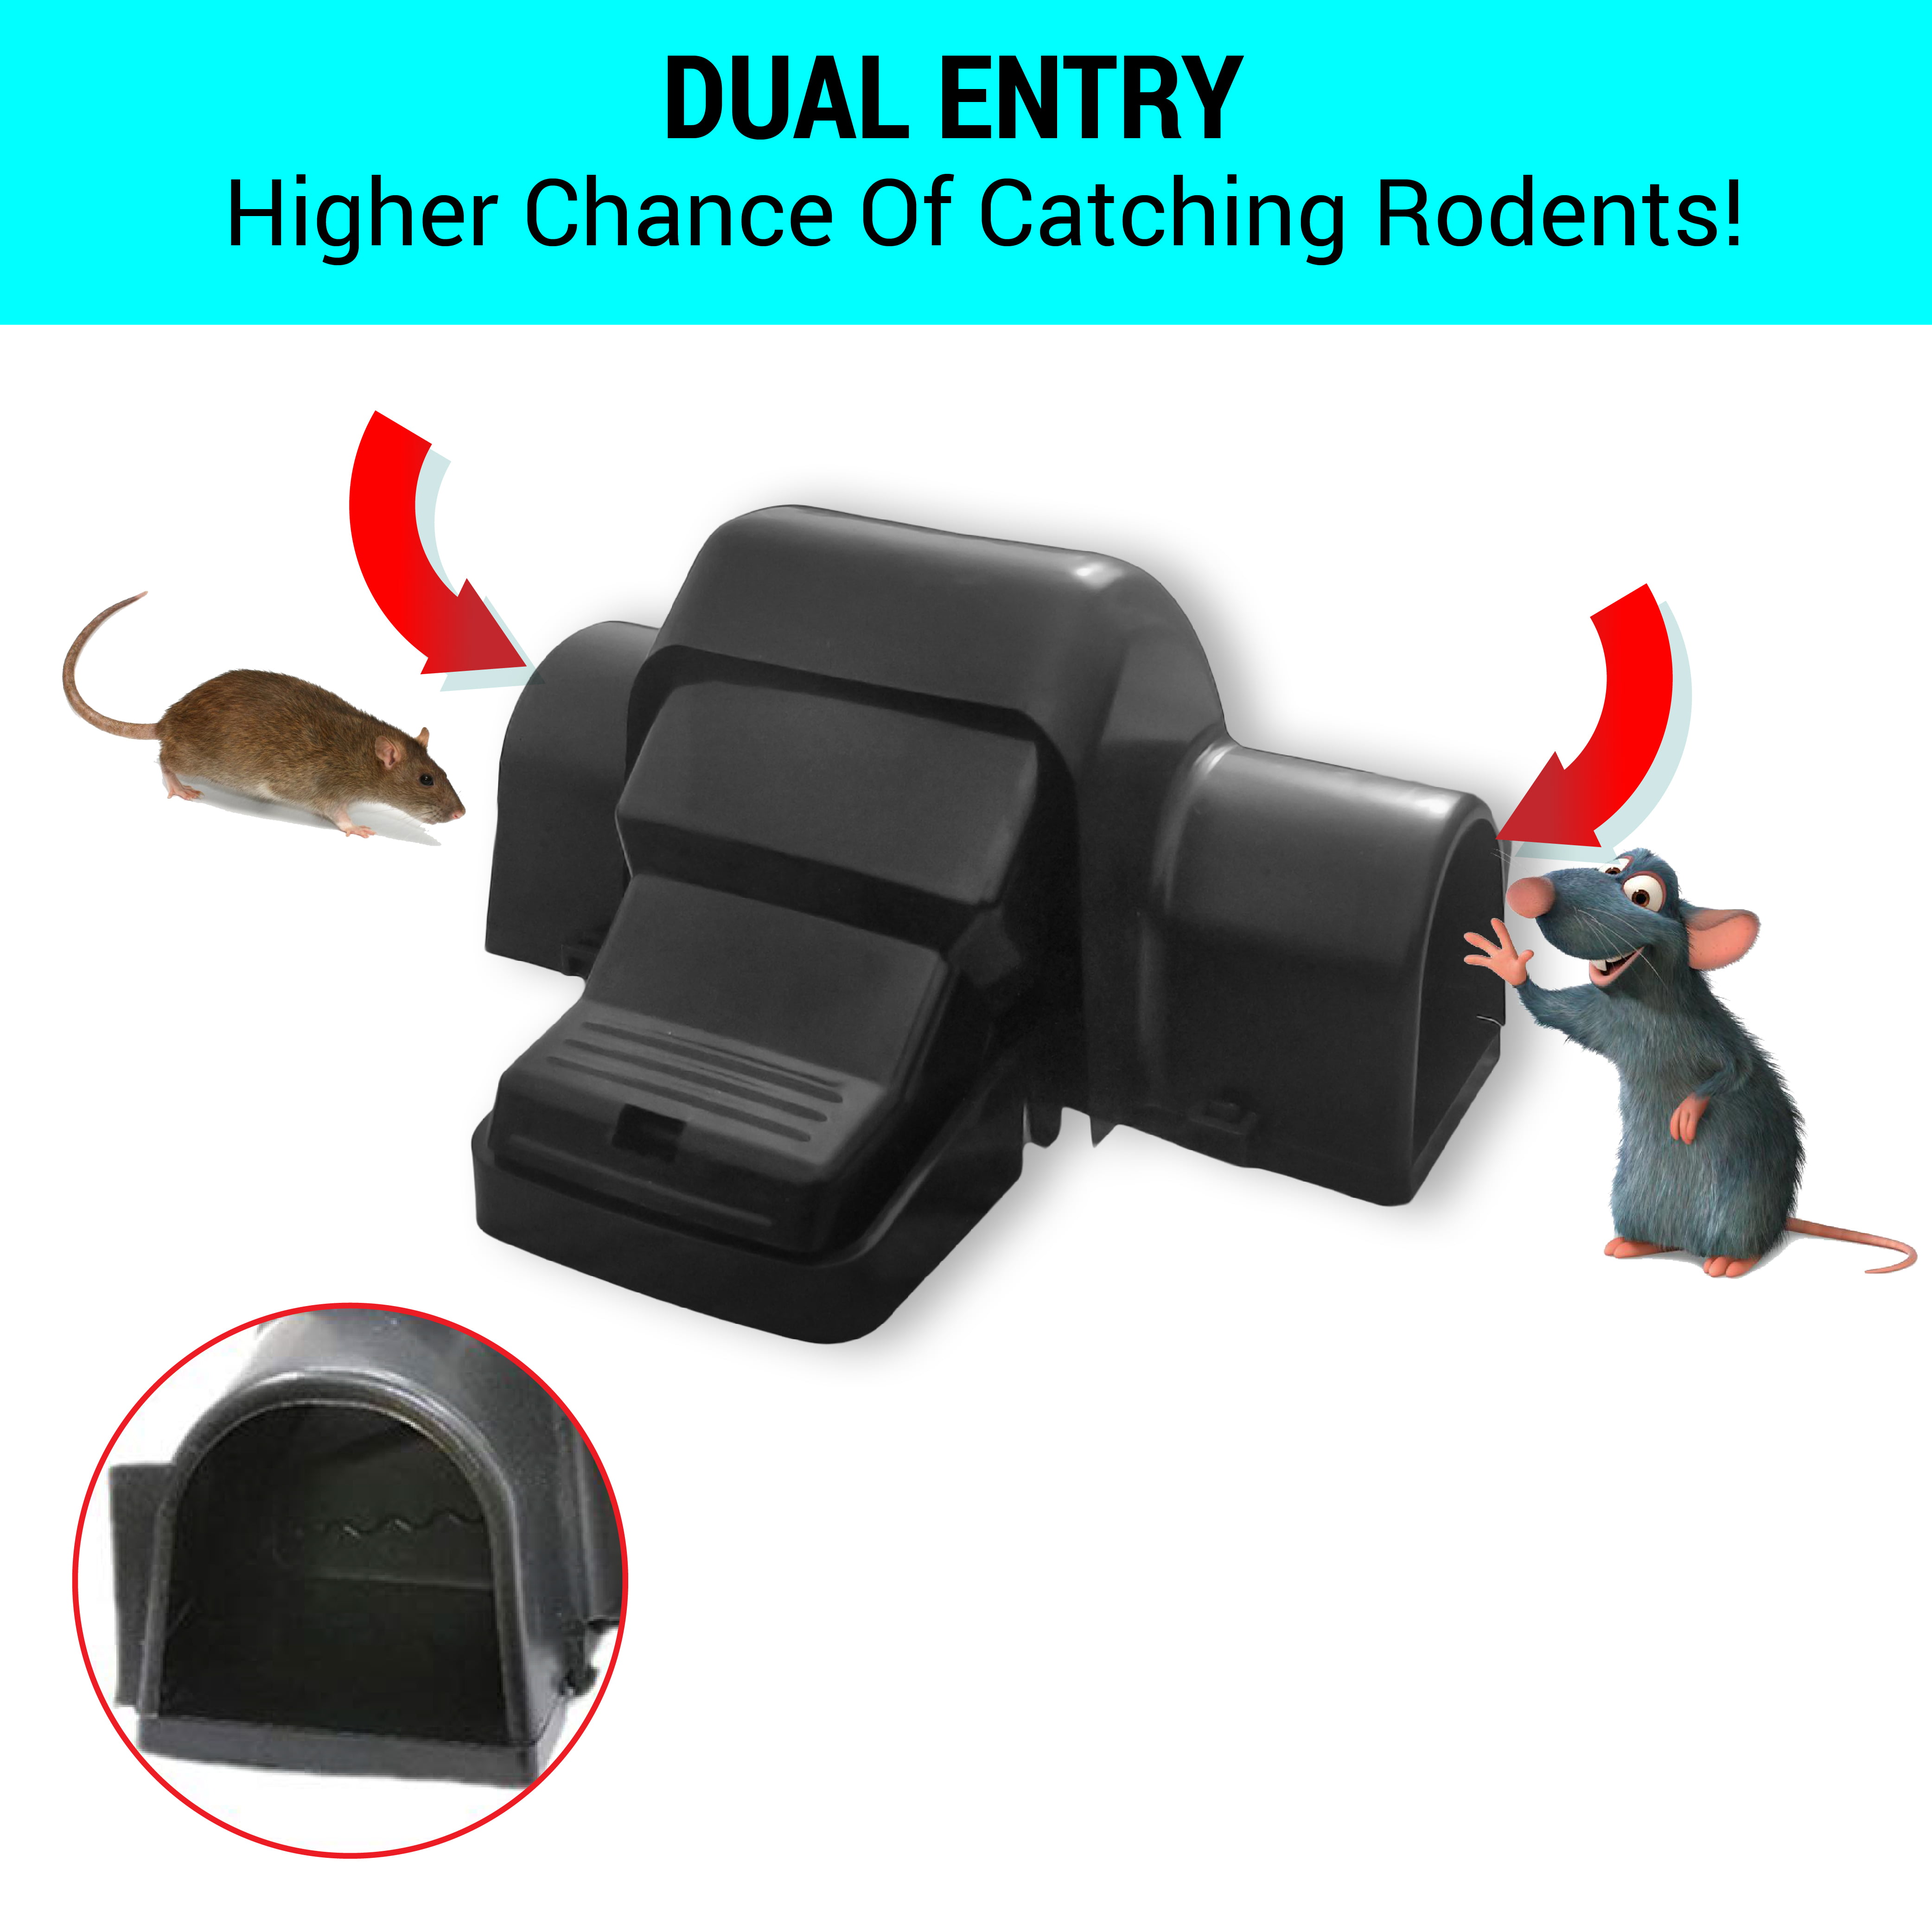 Exuby Pet-Safe Mouse Trap w/ Tunnel Design (3 Pack) – Dual Entry for Better Capture Rate - Prevents Accidental Triggering